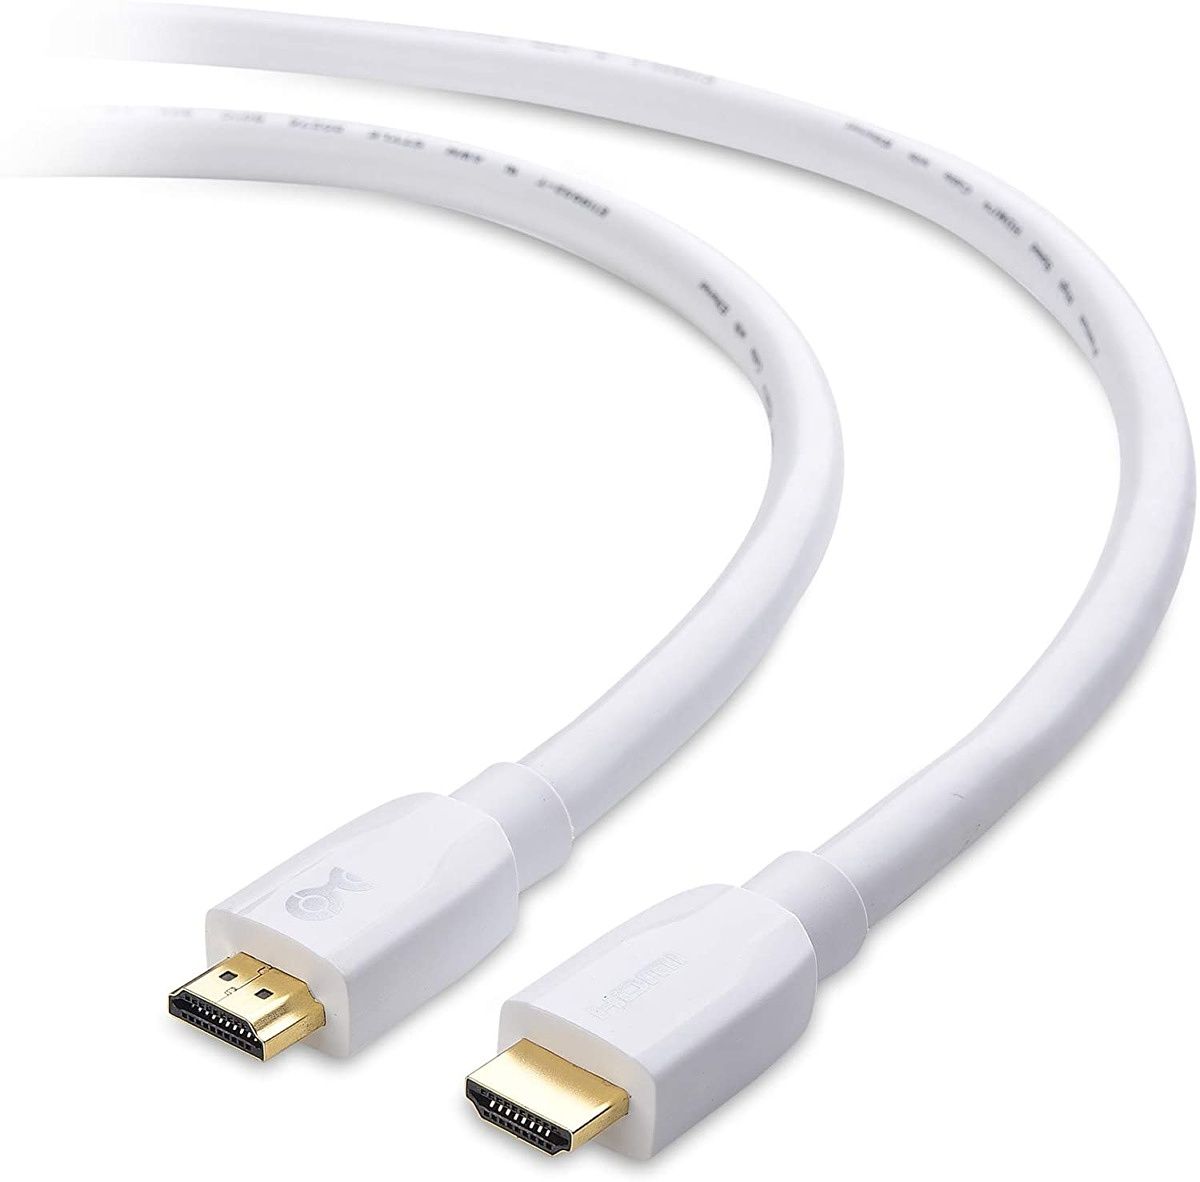 In addition to its excellent HDMI 2.1 cable, Cable Matters also offers this premium HDMI 2.0b cable. It supports HDR and HLG, both of which are not available in regular HDMI 2.0 cables.